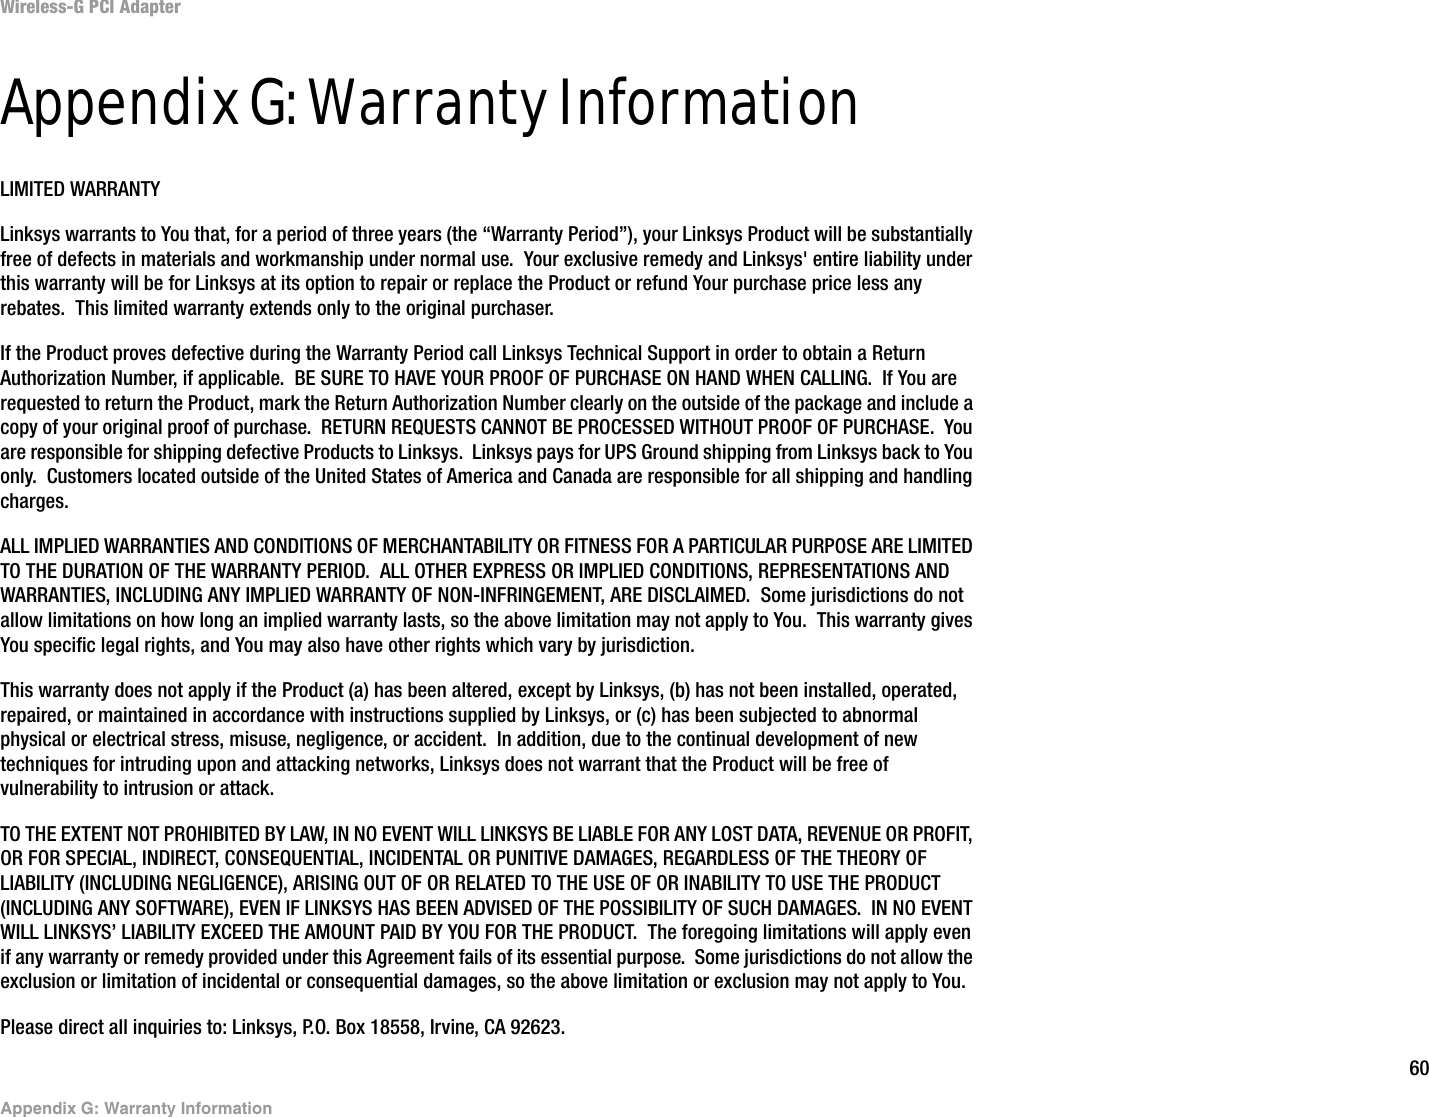 60Appendix G: Warranty InformationWireless-G PCI AdapterAppendix G: Warranty InformationLIMITED WARRANTYLinksys warrants to You that, for a period of three years (the “Warranty Period”), your Linksys Product will be substantially free of defects in materials and workmanship under normal use.  Your exclusive remedy and Linksys&apos; entire liability under this warranty will be for Linksys at its option to repair or replace the Product or refund Your purchase price less any rebates.  This limited warranty extends only to the original purchaser.  If the Product proves defective during the Warranty Period call Linksys Technical Support in order to obtain a Return Authorization Number, if applicable.  BE SURE TO HAVE YOUR PROOF OF PURCHASE ON HAND WHEN CALLING.  If You are requested to return the Product, mark the Return Authorization Number clearly on the outside of the package and include a copy of your original proof of purchase.  RETURN REQUESTS CANNOT BE PROCESSED WITHOUT PROOF OF PURCHASE.  You are responsible for shipping defective Products to Linksys.  Linksys pays for UPS Ground shipping from Linksys back to You only.  Customers located outside of the United States of America and Canada are responsible for all shipping and handling charges. ALL IMPLIED WARRANTIES AND CONDITIONS OF MERCHANTABILITY OR FITNESS FOR A PARTICULAR PURPOSE ARE LIMITED TO THE DURATION OF THE WARRANTY PERIOD.  ALL OTHER EXPRESS OR IMPLIED CONDITIONS, REPRESENTATIONS AND WARRANTIES, INCLUDING ANY IMPLIED WARRANTY OF NON-INFRINGEMENT, ARE DISCLAIMED.  Some jurisdictions do not allow limitations on how long an implied warranty lasts, so the above limitation may not apply to You.  This warranty gives You specific legal rights, and You may also have other rights which vary by jurisdiction.This warranty does not apply if the Product (a) has been altered, except by Linksys, (b) has not been installed, operated, repaired, or maintained in accordance with instructions supplied by Linksys, or (c) has been subjected to abnormal physical or electrical stress, misuse, negligence, or accident.  In addition, due to the continual development of new techniques for intruding upon and attacking networks, Linksys does not warrant that the Product will be free of vulnerability to intrusion or attack.TO THE EXTENT NOT PROHIBITED BY LAW, IN NO EVENT WILL LINKSYS BE LIABLE FOR ANY LOST DATA, REVENUE OR PROFIT, OR FOR SPECIAL, INDIRECT, CONSEQUENTIAL, INCIDENTAL OR PUNITIVE DAMAGES, REGARDLESS OF THE THEORY OF LIABILITY (INCLUDING NEGLIGENCE), ARISING OUT OF OR RELATED TO THE USE OF OR INABILITY TO USE THE PRODUCT (INCLUDING ANY SOFTWARE), EVEN IF LINKSYS HAS BEEN ADVISED OF THE POSSIBILITY OF SUCH DAMAGES.  IN NO EVENT WILL LINKSYS’ LIABILITY EXCEED THE AMOUNT PAID BY YOU FOR THE PRODUCT.  The foregoing limitations will apply even if any warranty or remedy provided under this Agreement fails of its essential purpose.  Some jurisdictions do not allow the exclusion or limitation of incidental or consequential damages, so the above limitation or exclusion may not apply to You.Please direct all inquiries to: Linksys, P.O. Box 18558, Irvine, CA 92623.